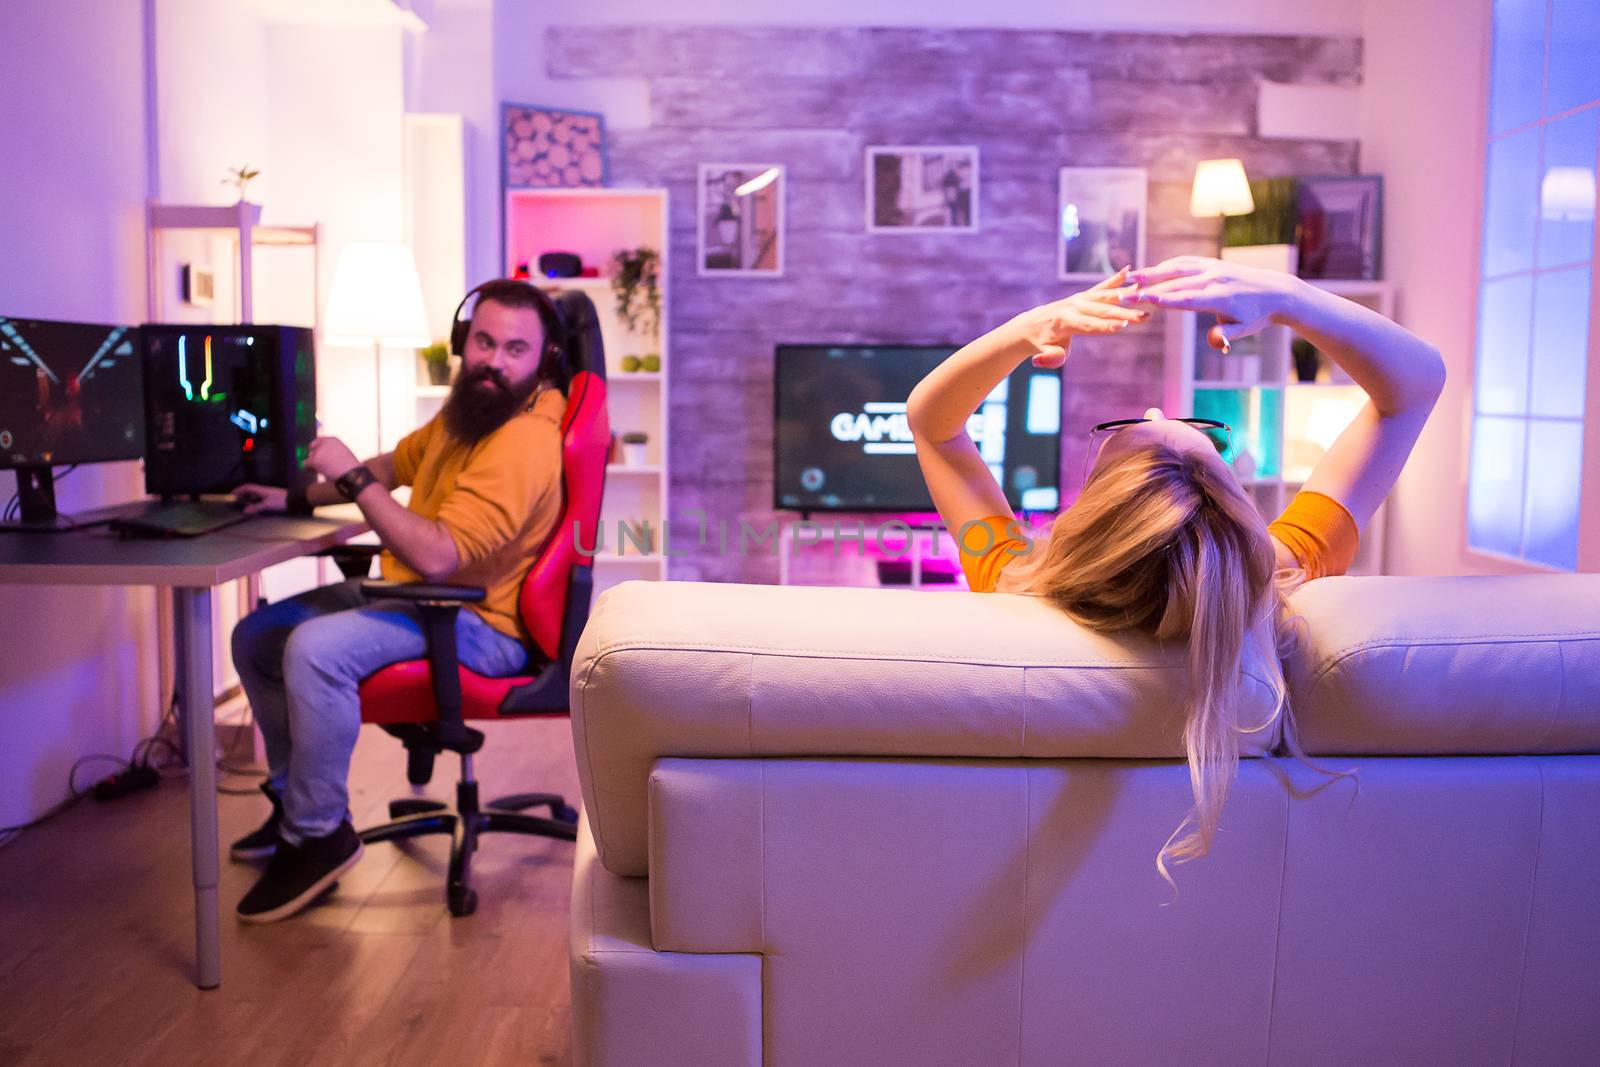 Back view of game over for a girl while playing video games on television. Male on gaming chair.